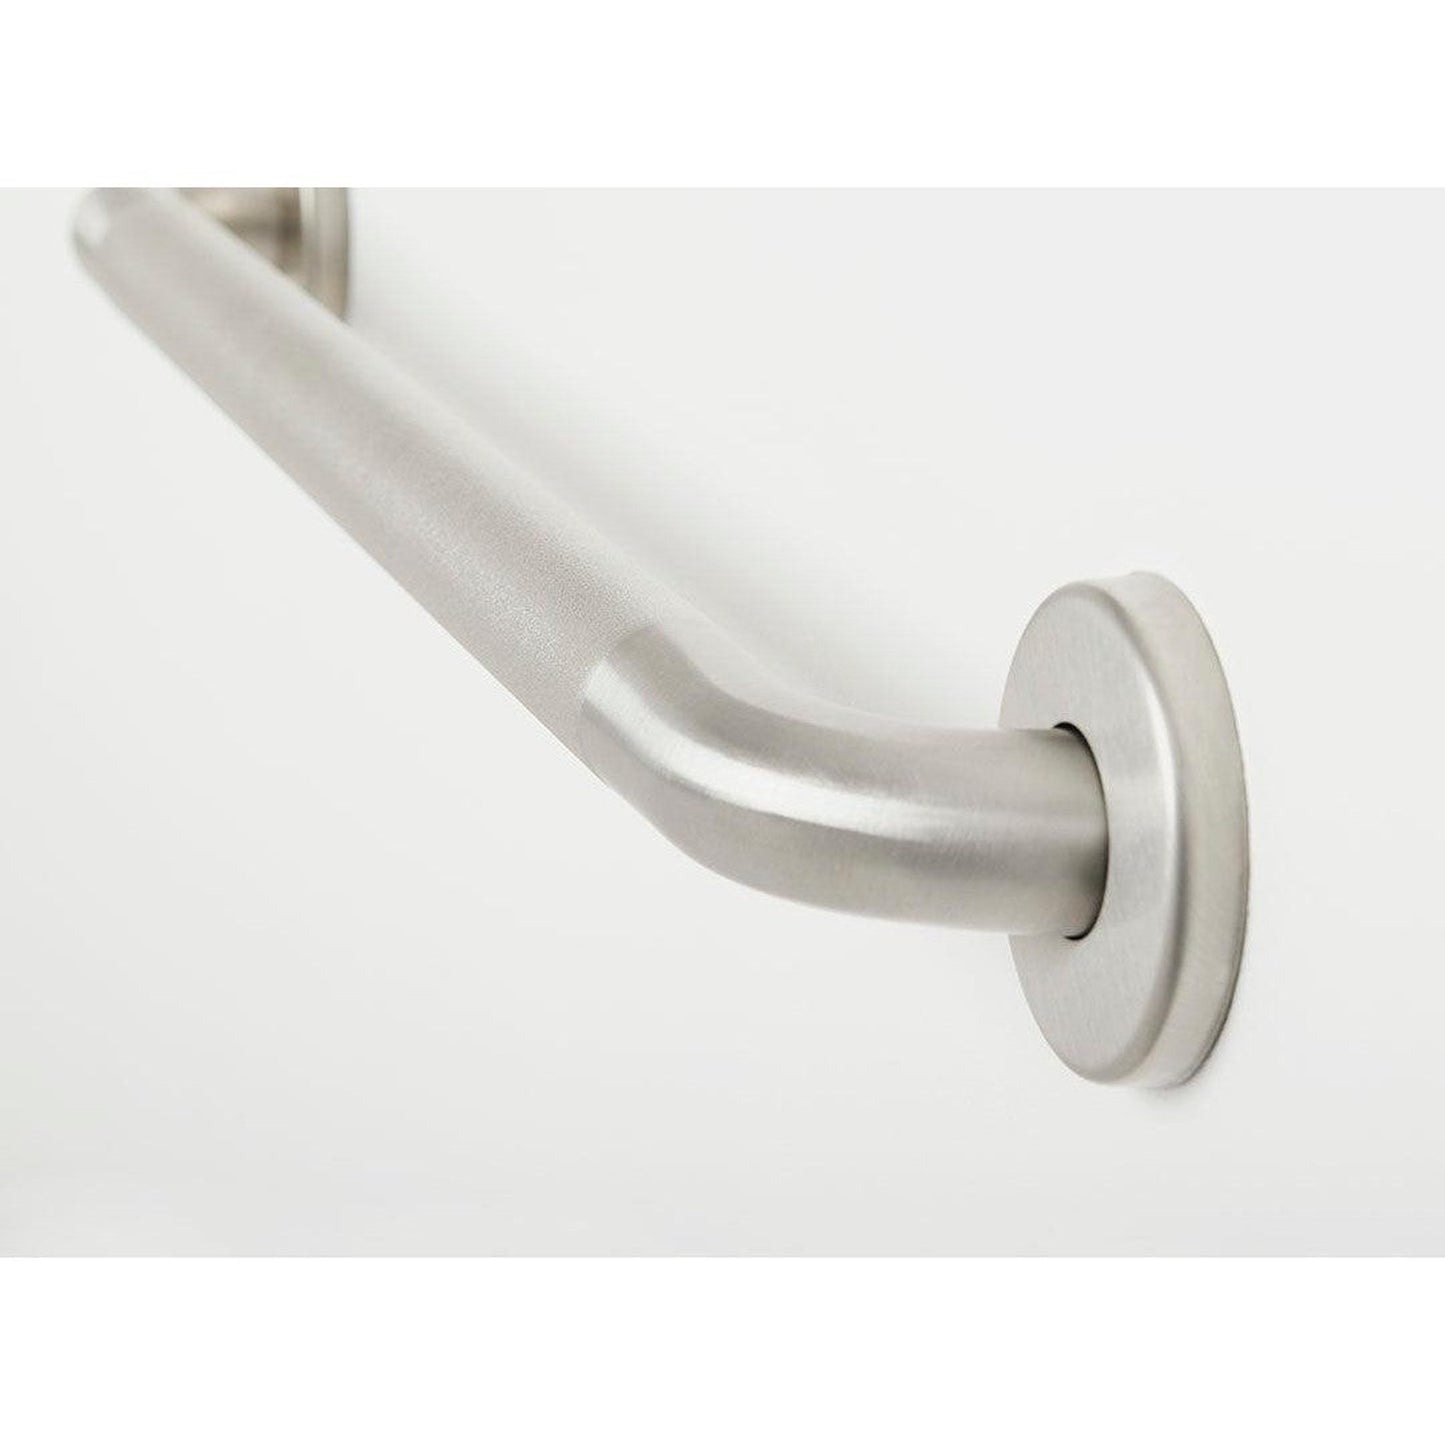 Seachrome Signature Series Value Line 18" Peened Stainless Steel With Satin Ends 1.5" Tube Diameter Straight Concealed Flange Grab Bar